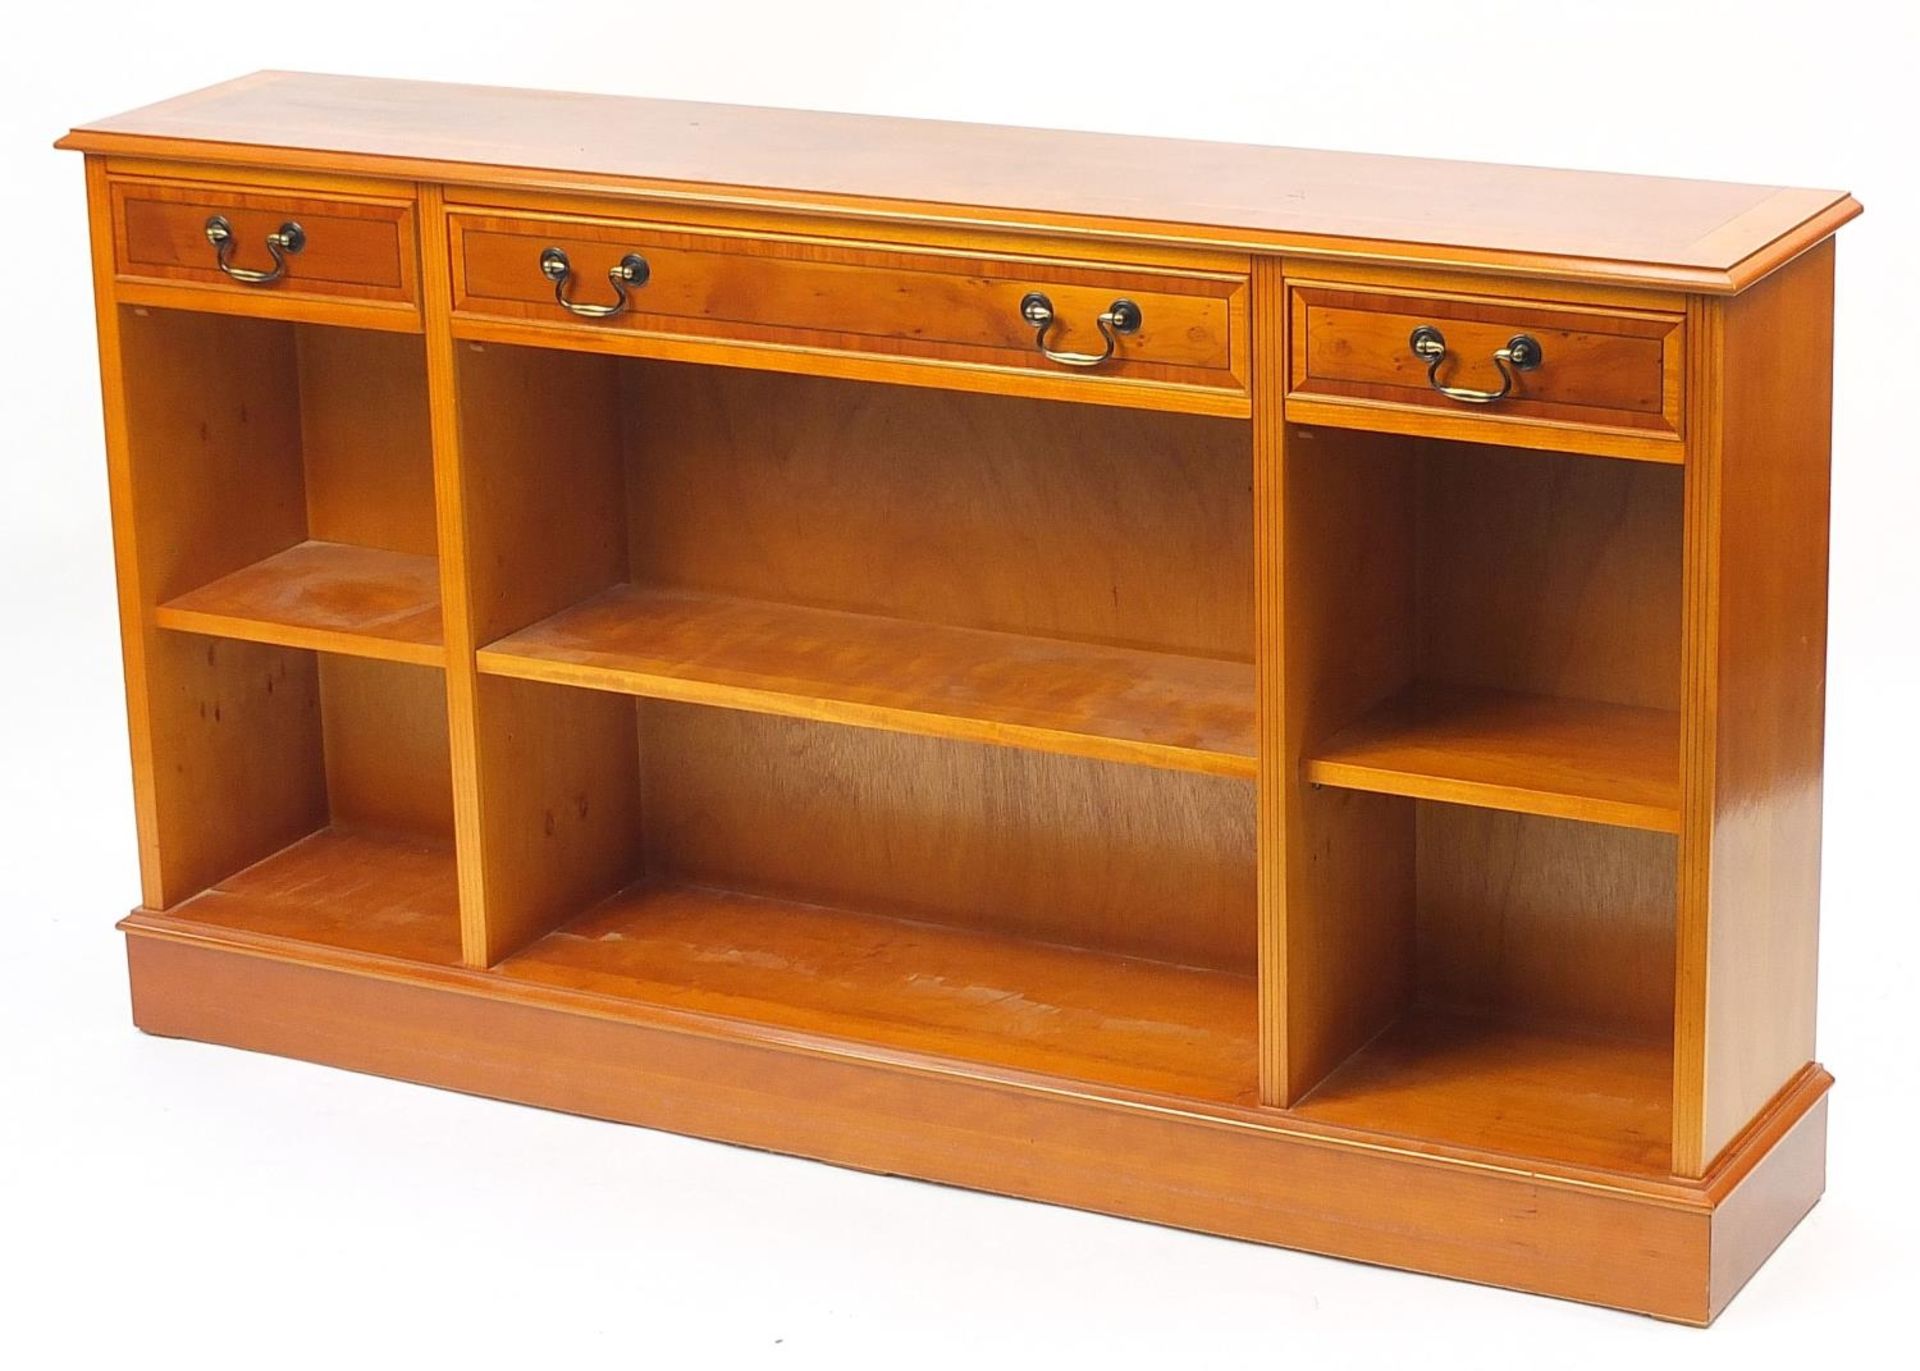 Inlaid yew open bookcase fitted with three drawers above three adjustable shelves, 84.5cm H x